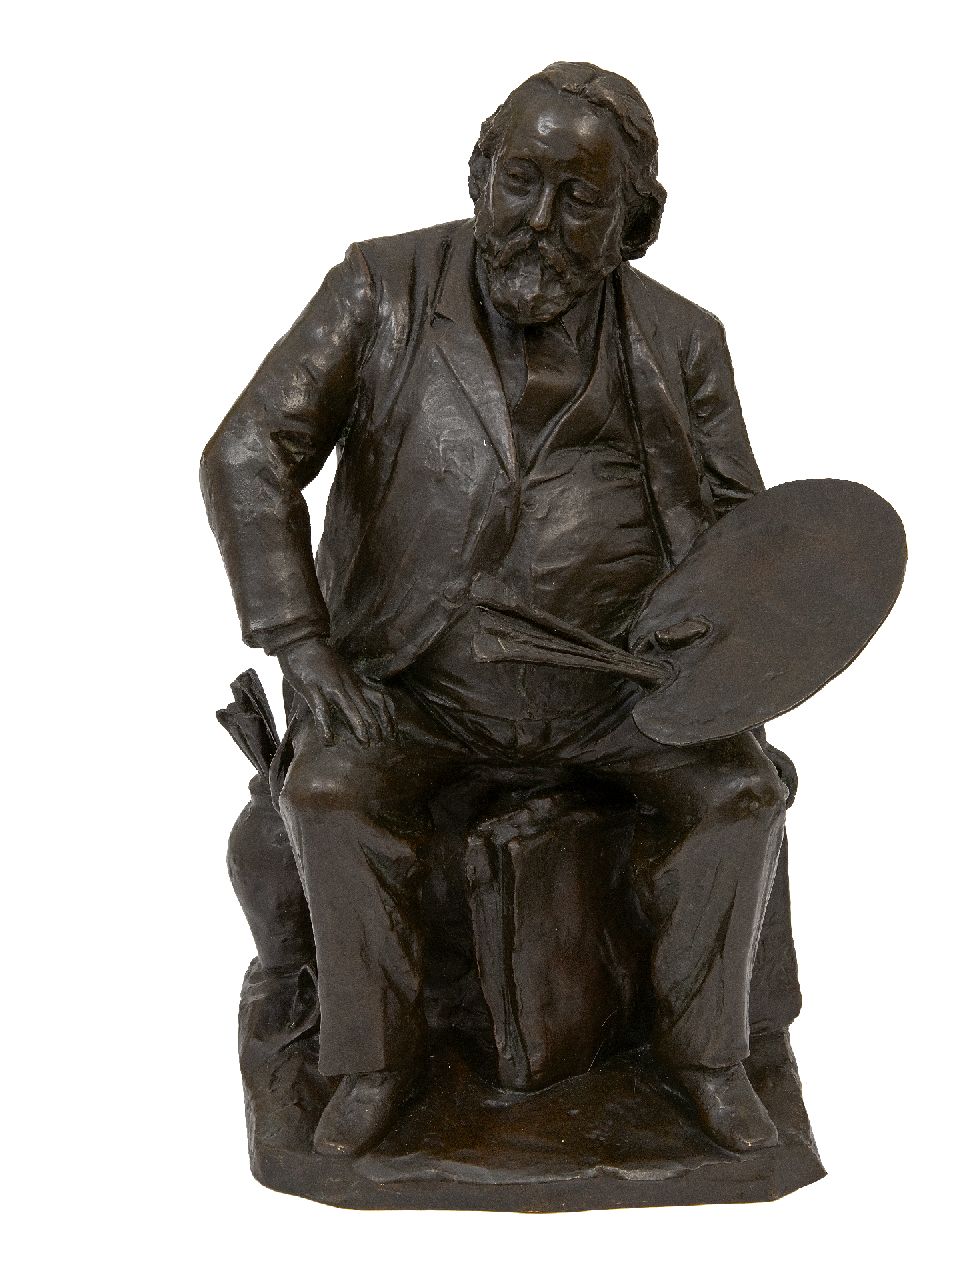 Odé A.W.M.  | 'Arend' Willem Maurits Odé, The Dutch painter Jacob Maris, bronze 43.0 x 27.5 cm, signed on the portfolio and dated '95